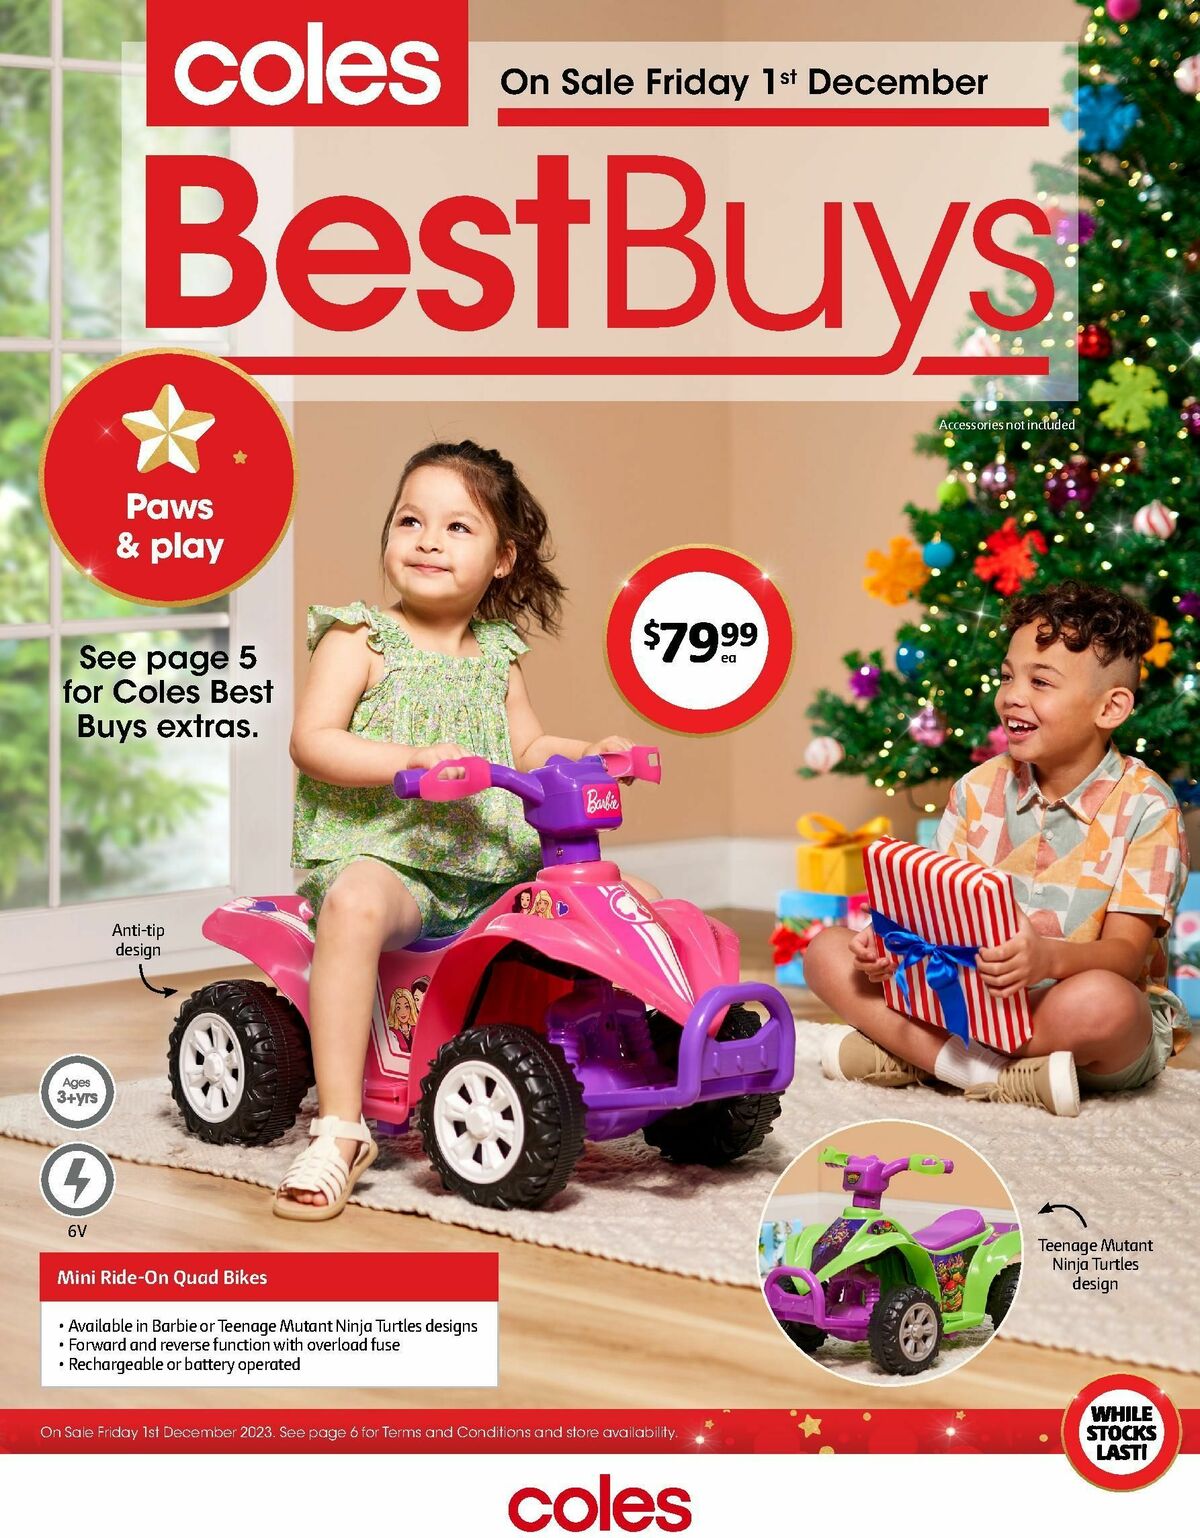 Coles Best Buys - Paws & Play Catalogues from 1 December